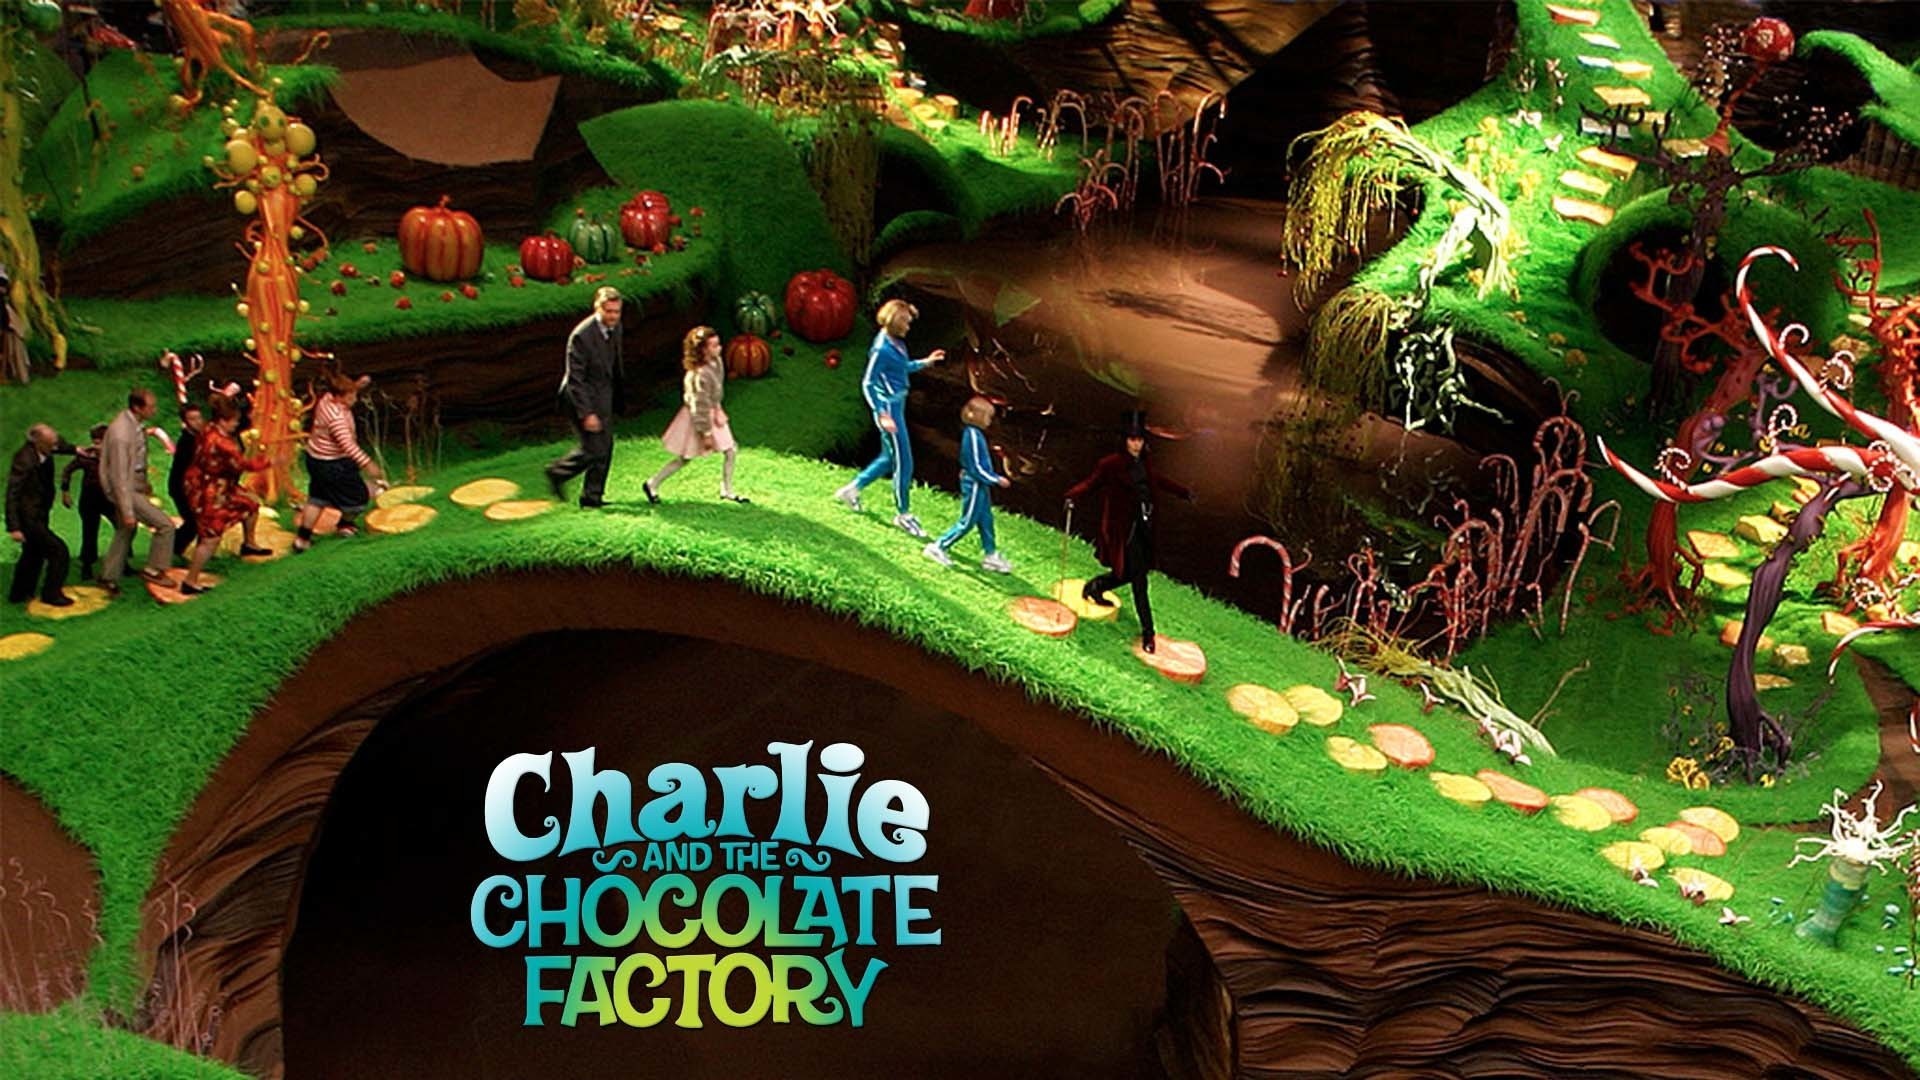 Charlie and the Chocolate Factory, 96 wallpapers, Fantasy comedy, Tim Burton, 1920x1080 Full HD Desktop